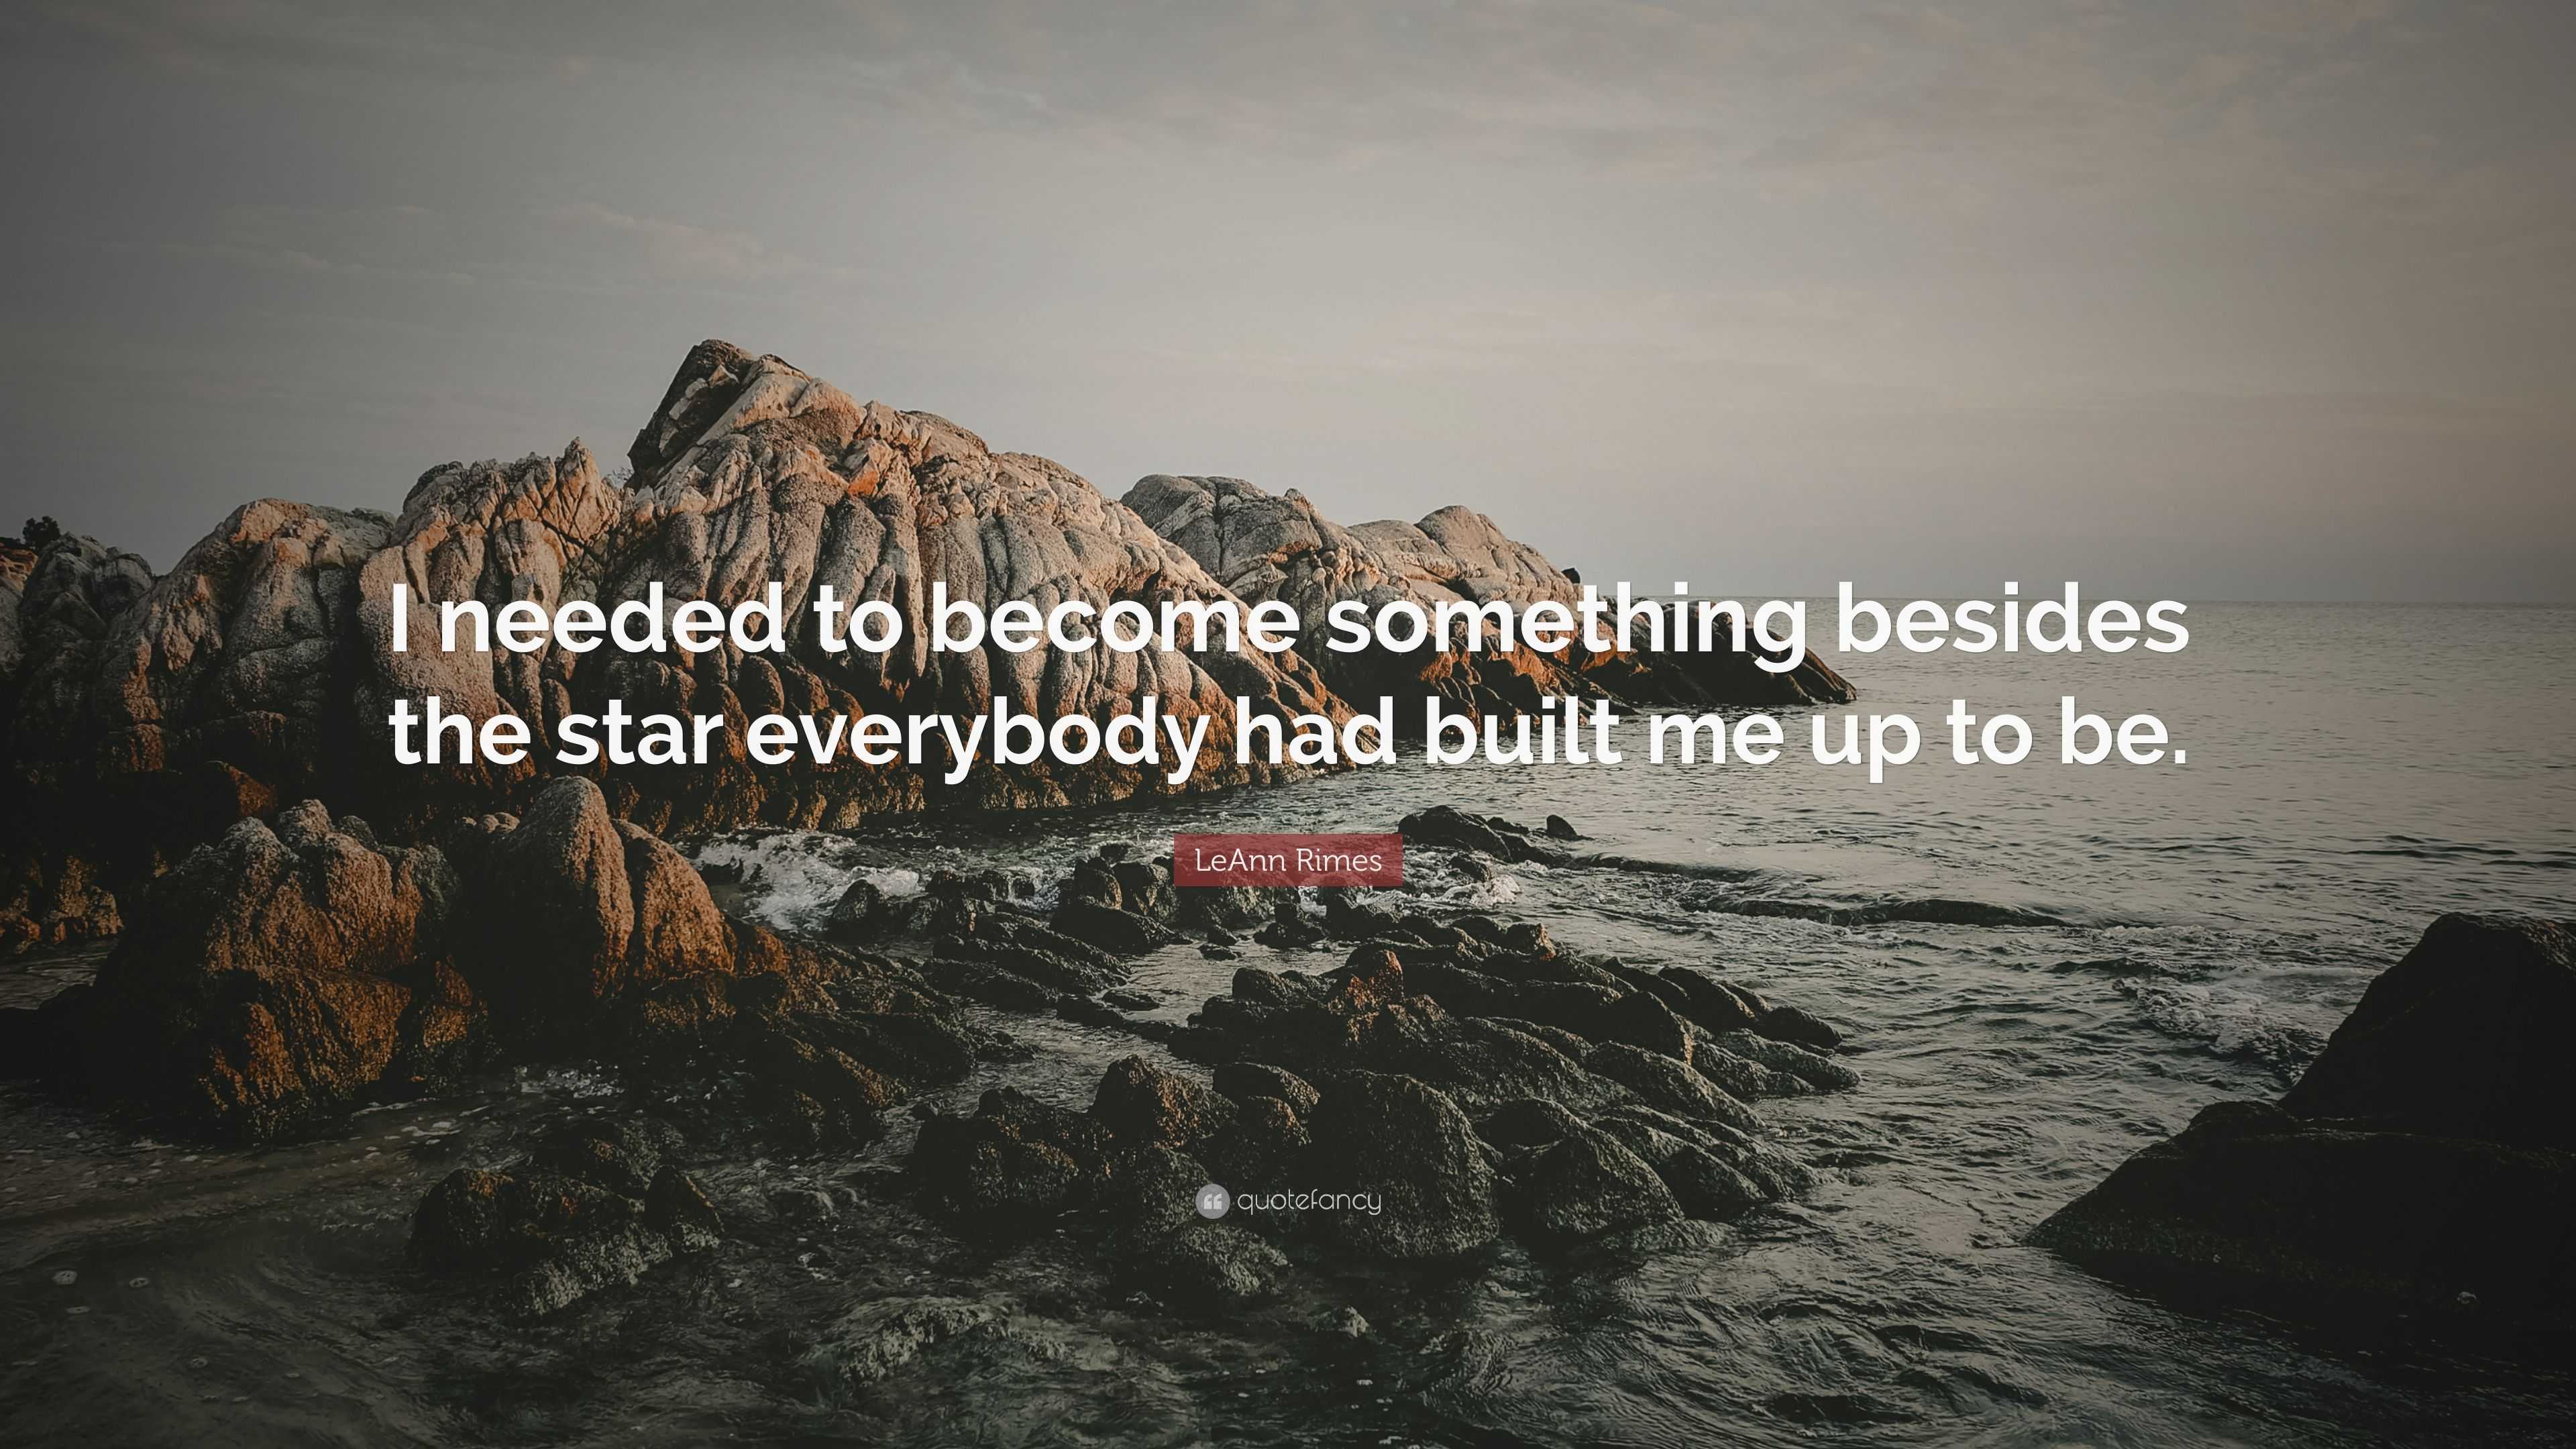 Leann Rimes Quote “i Needed To Become Something Besides The Star Everybody Had Built Me Up To Be” 